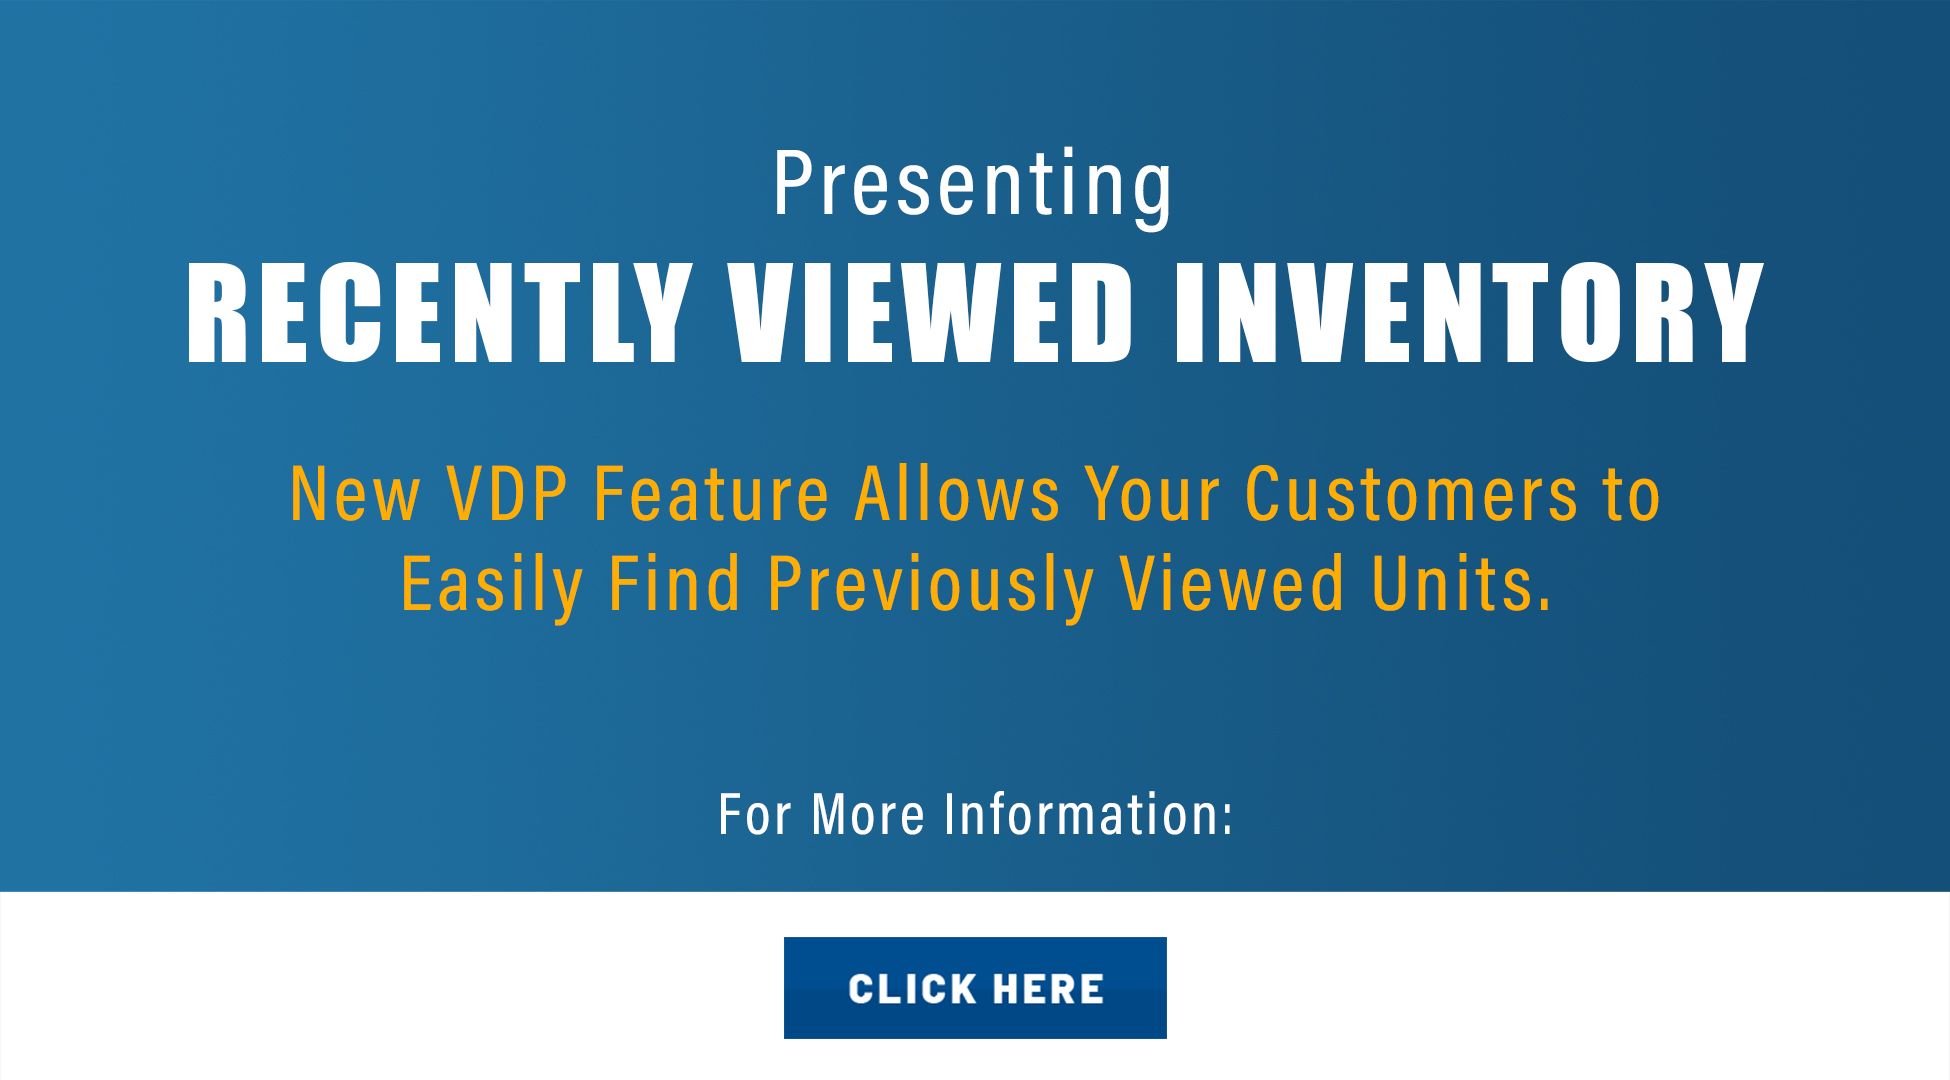 See details on the new Recently Viewed Inventory feature